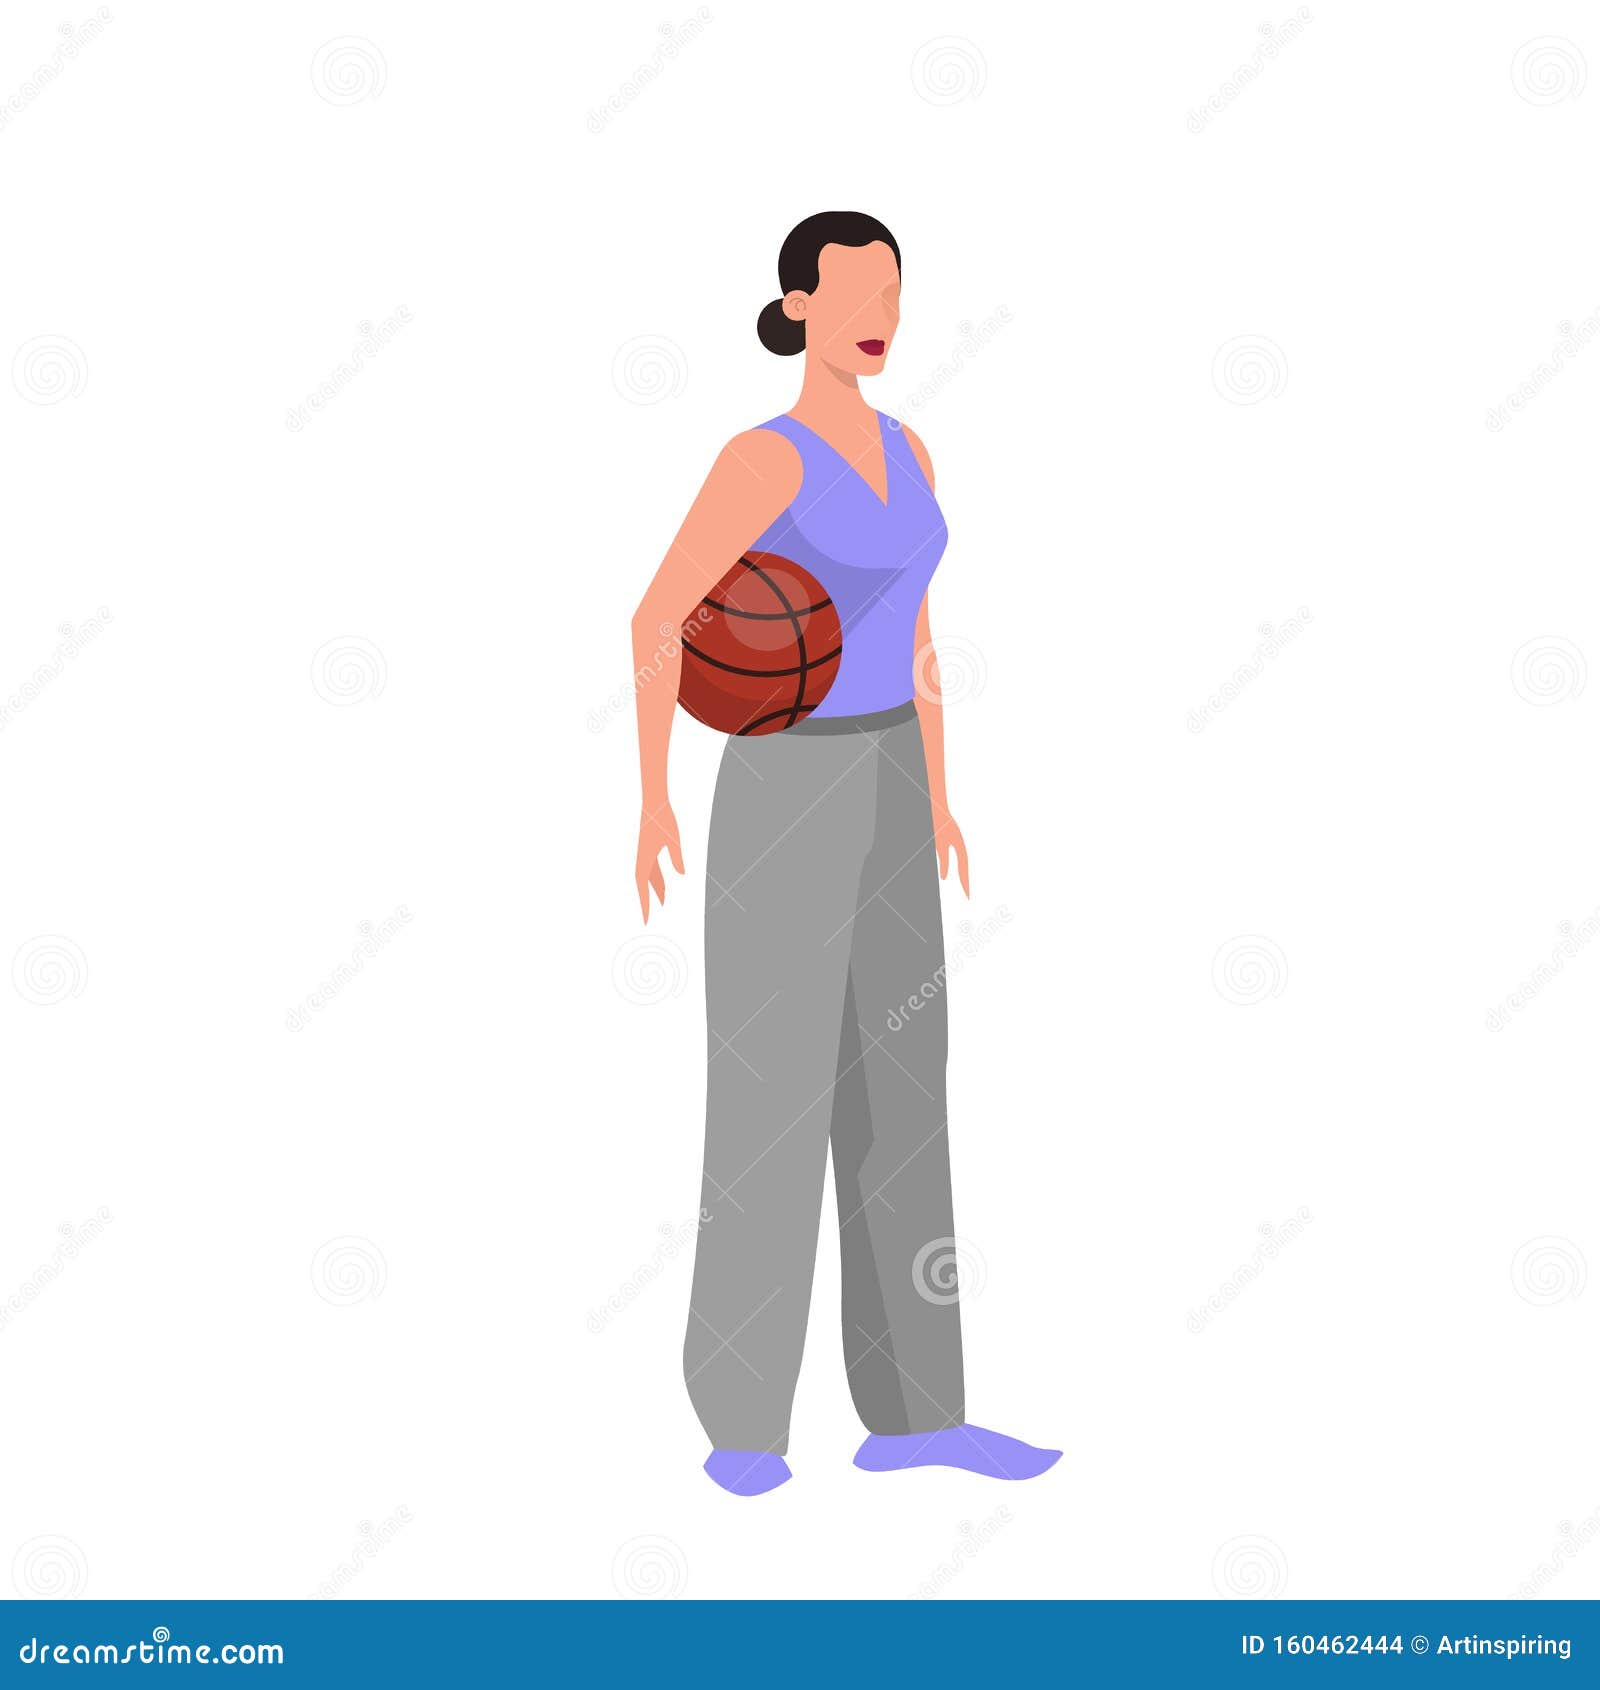 Woman Basketball Coach Stock Illustrations – 47 Woman Basketball Coach  Stock Illustrations, Vectors & Clipart - Dreamstime